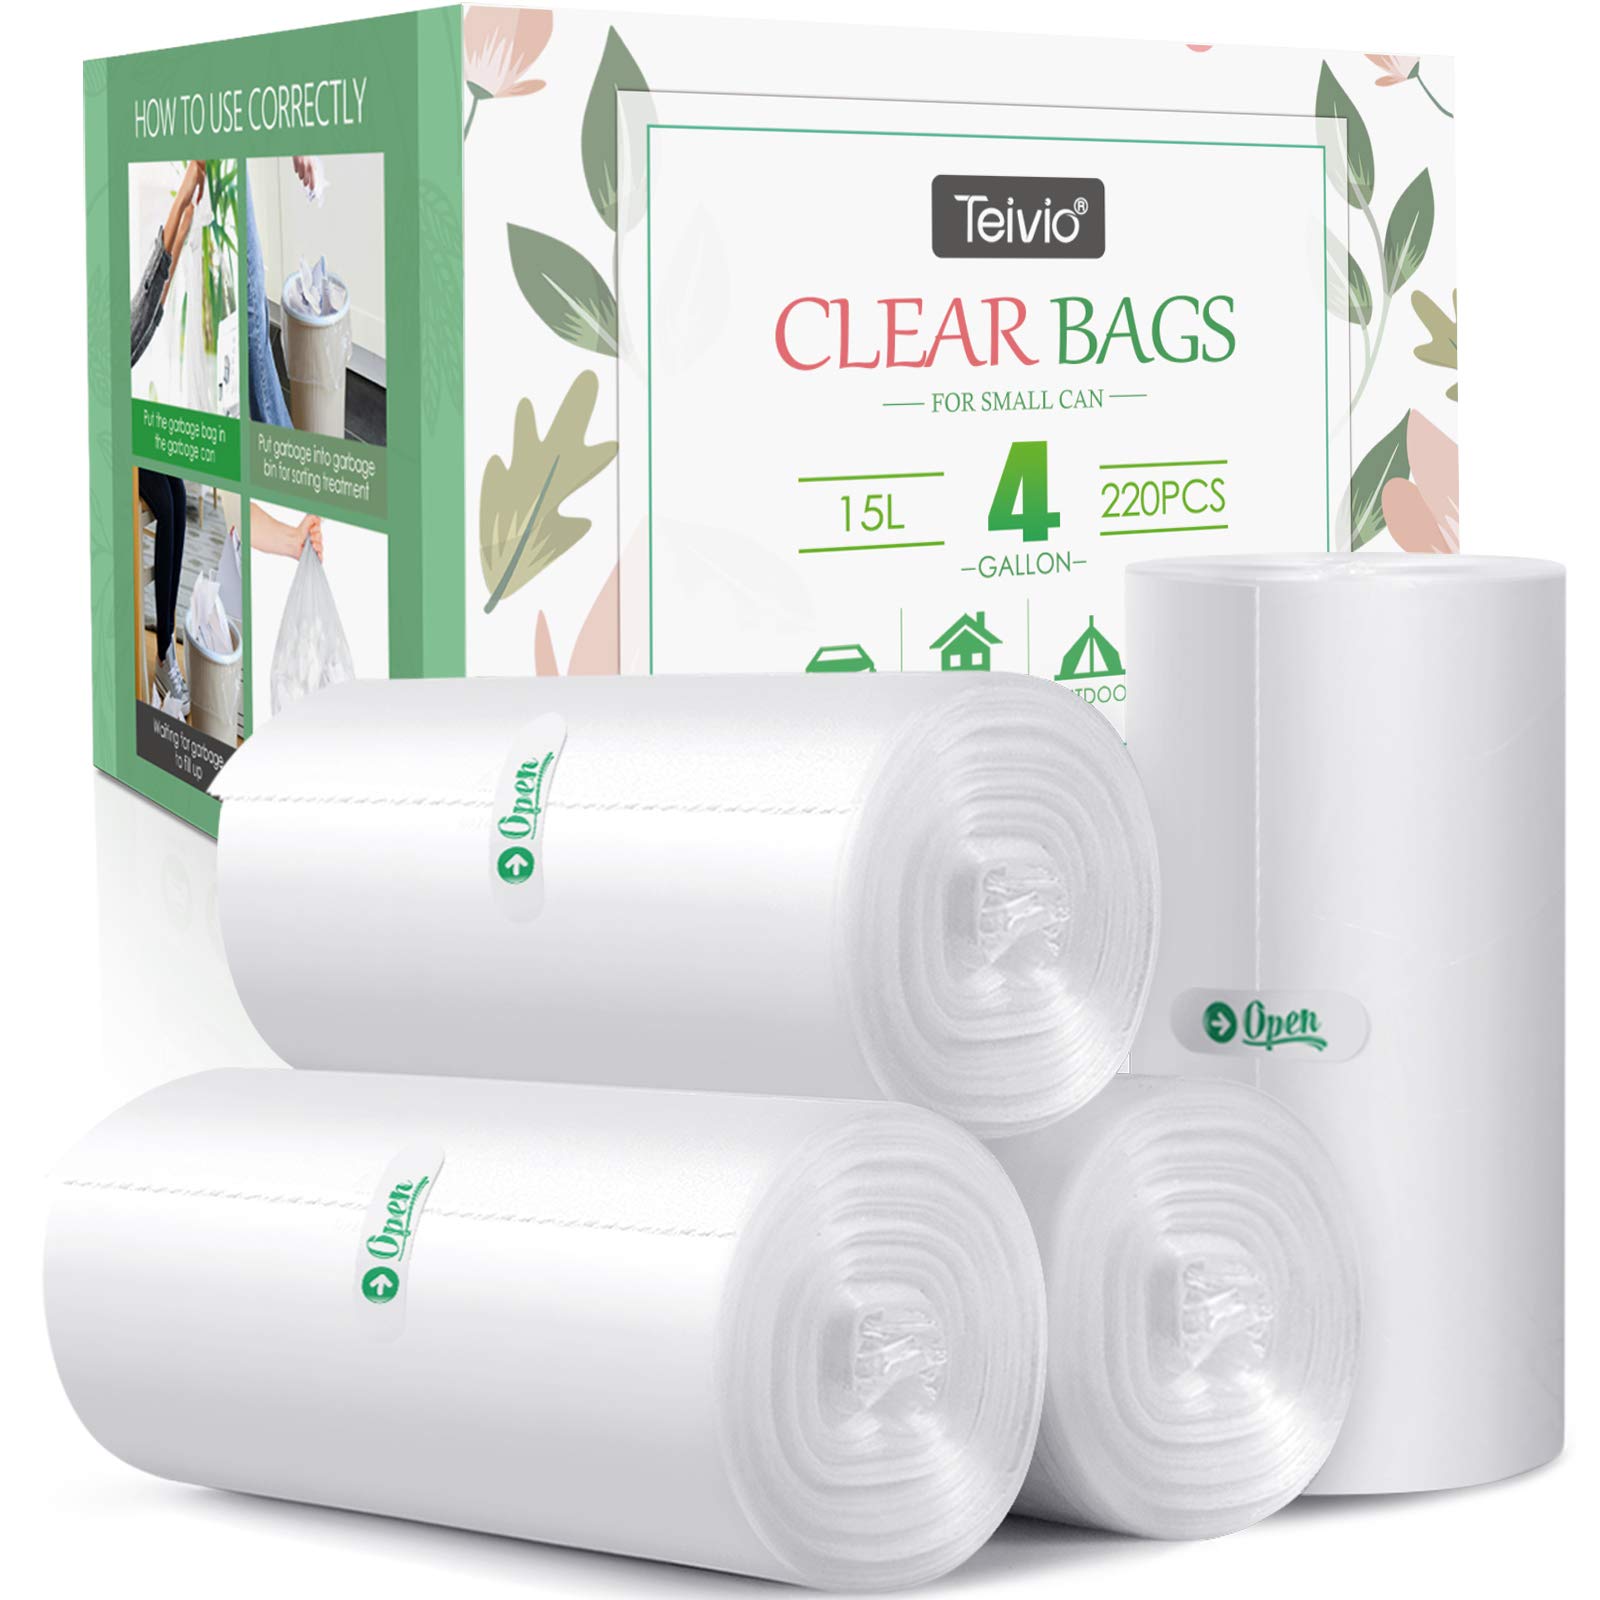 4 Gallon 330Pcs Strong Trash Bags Colorful Clear Garbage Bags, Bathroom  Trash Can Bin Liners, Small Plastic Bags For Home Office Kitchen, Fit 12-15